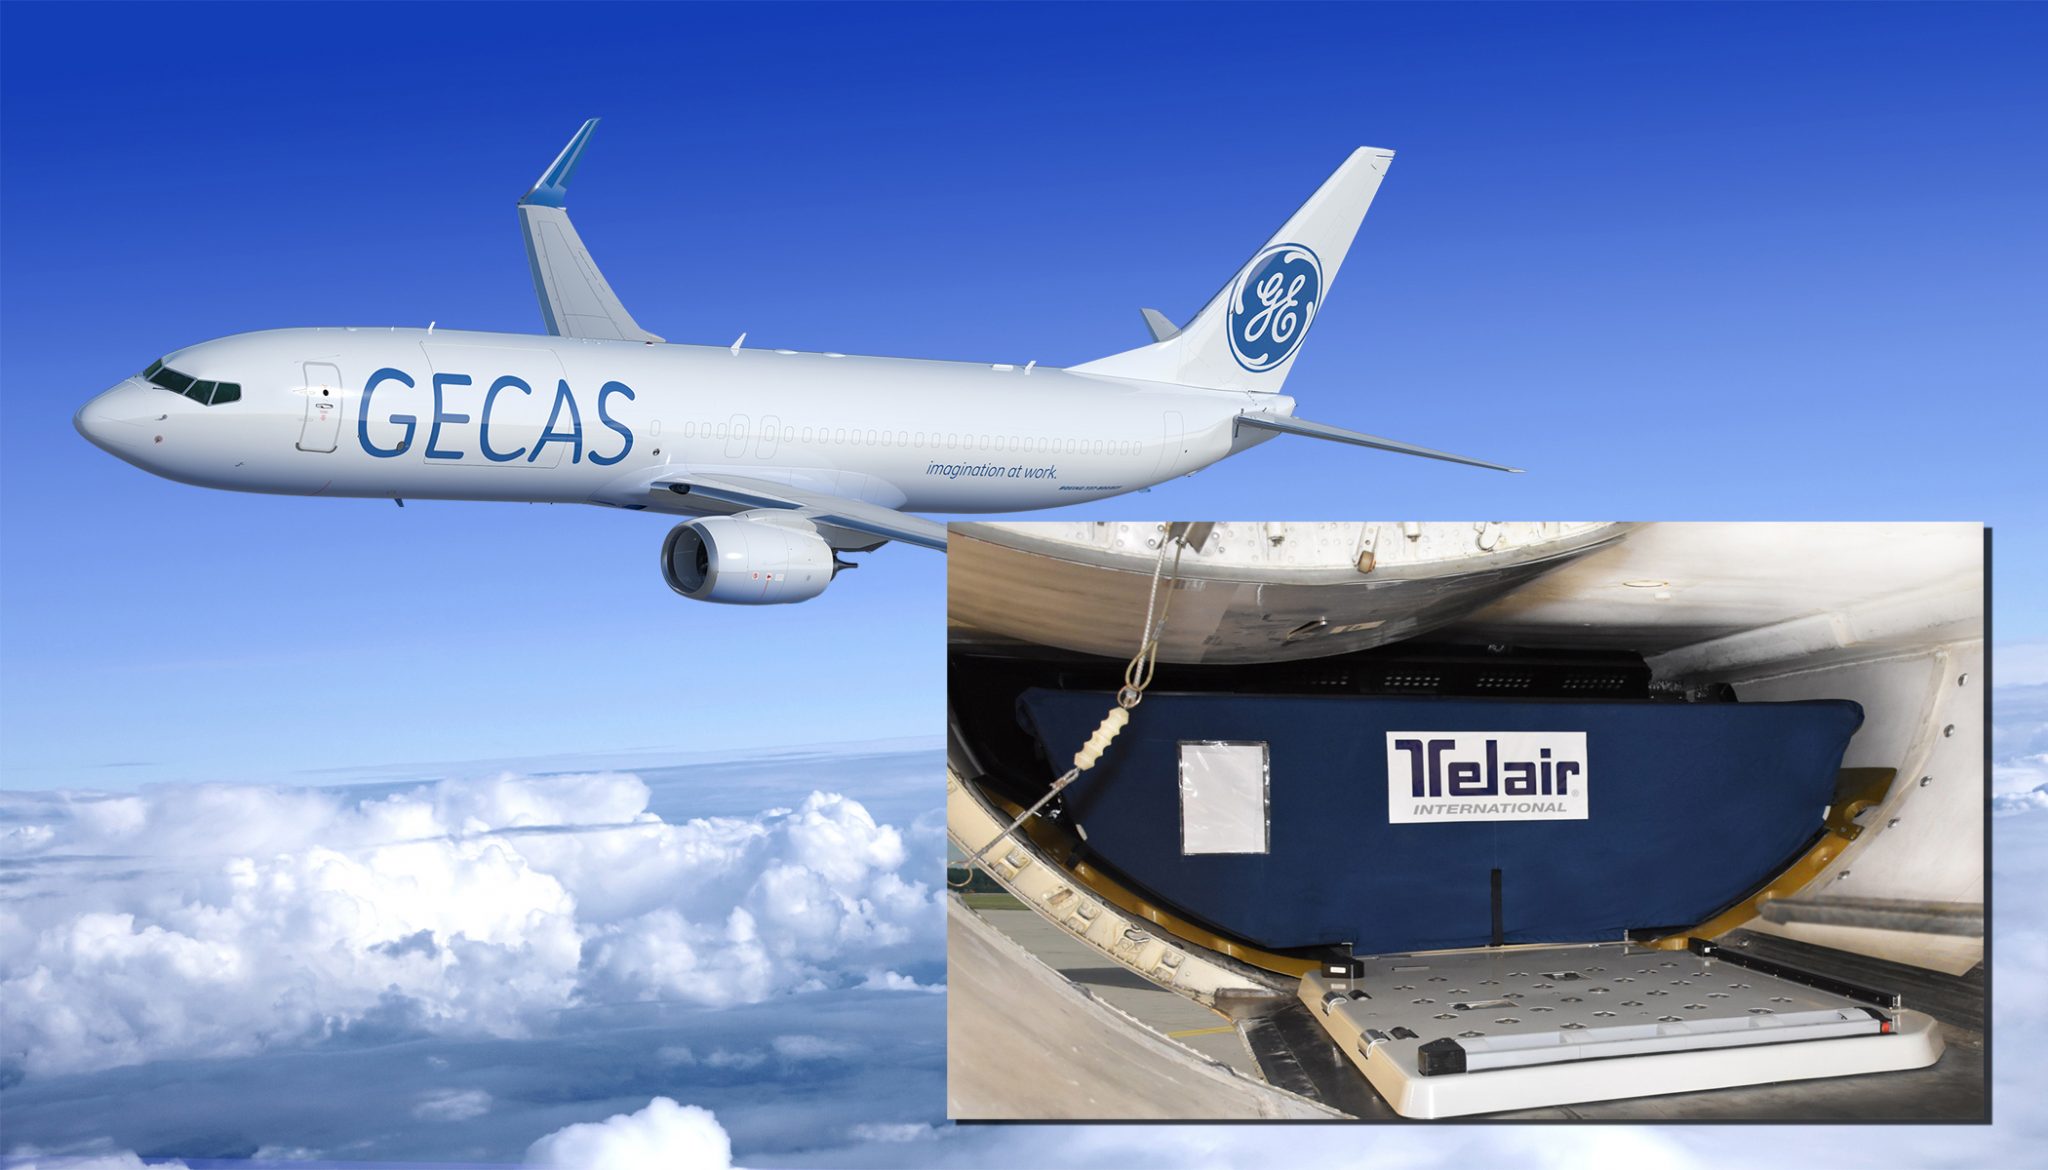 GECAS to Introduce Telair’s New Flexible Loading System with Boeing 737-800 Converted Freighter Operators